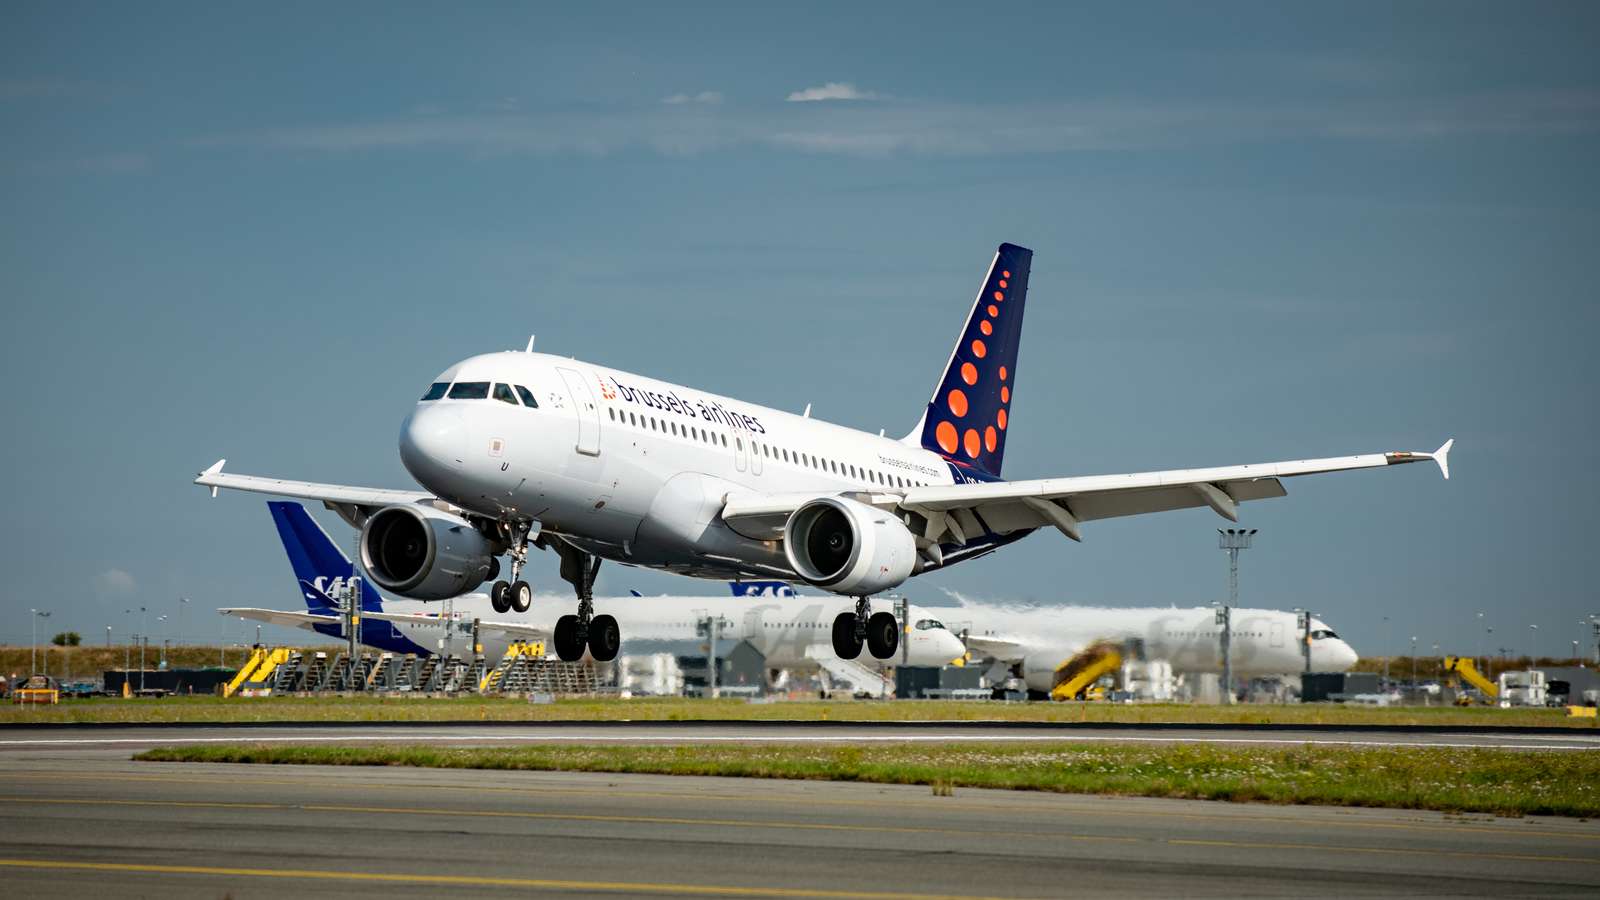 Brussels Airlines Airbus A319 100 landing